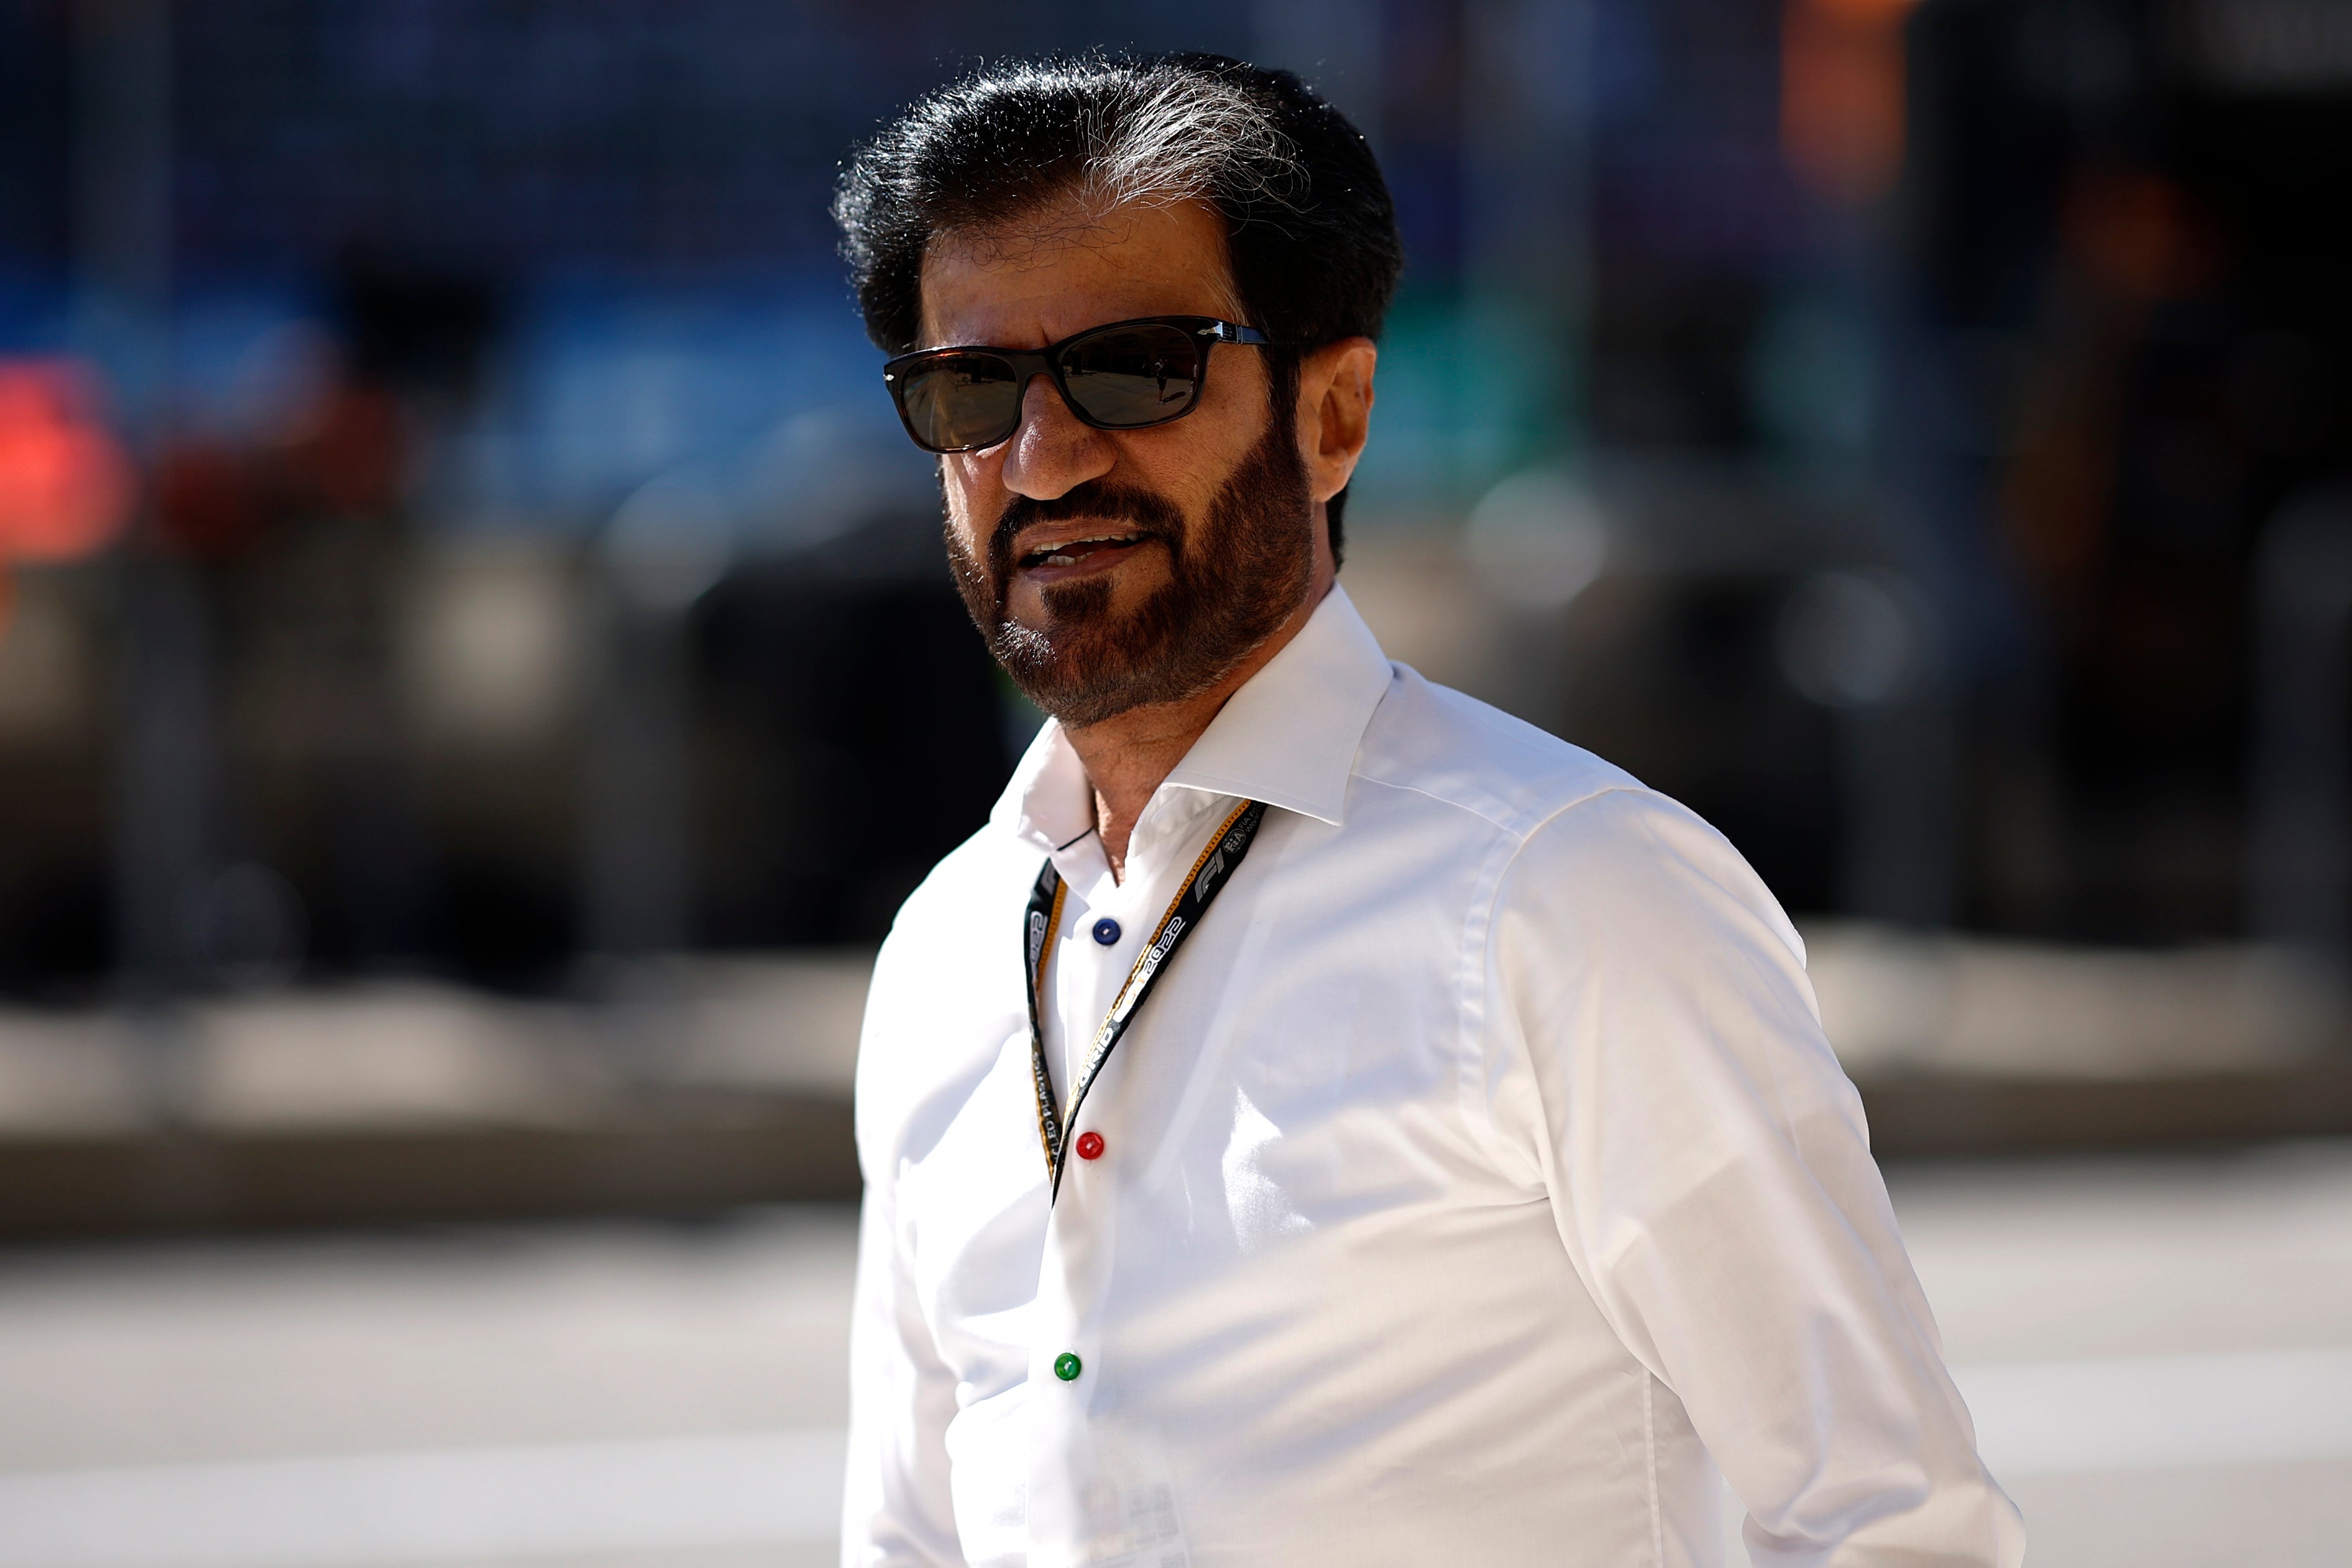 F1 chiefs have hit back at Mohammed Ben Sulayem’s claims that a reported £16bn price tag the sport’s commercial rights is “inflated”